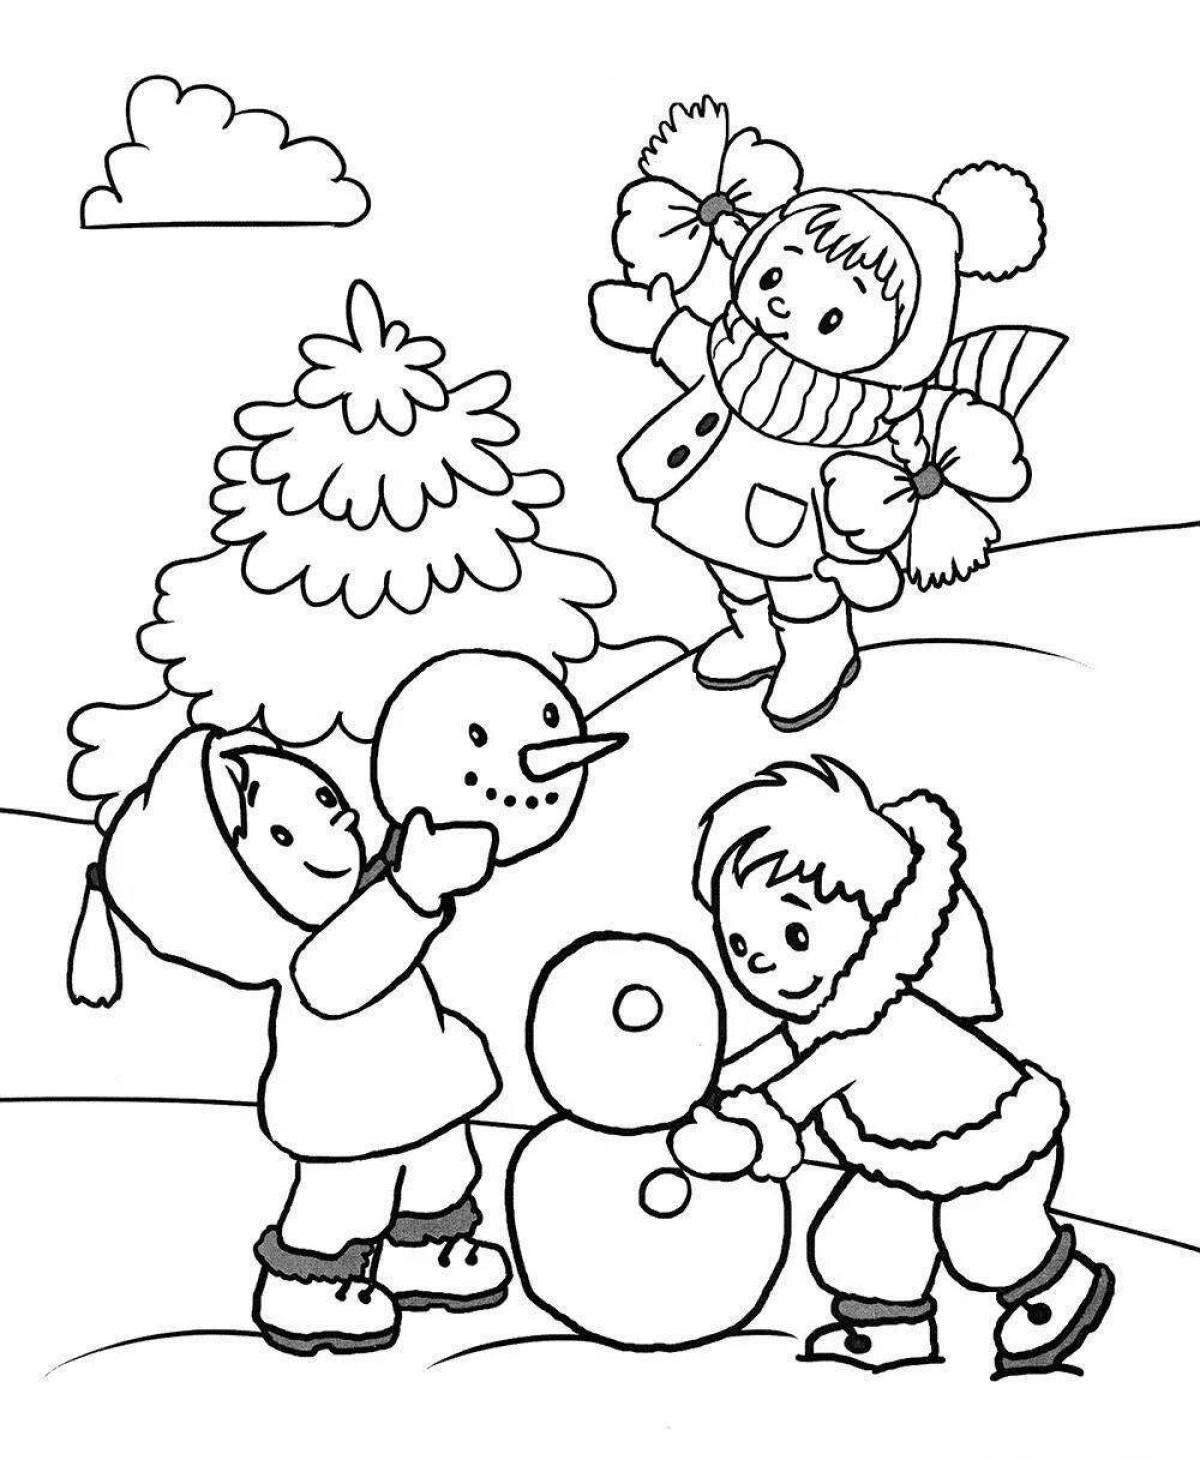 Flawless winter crystal coloring page